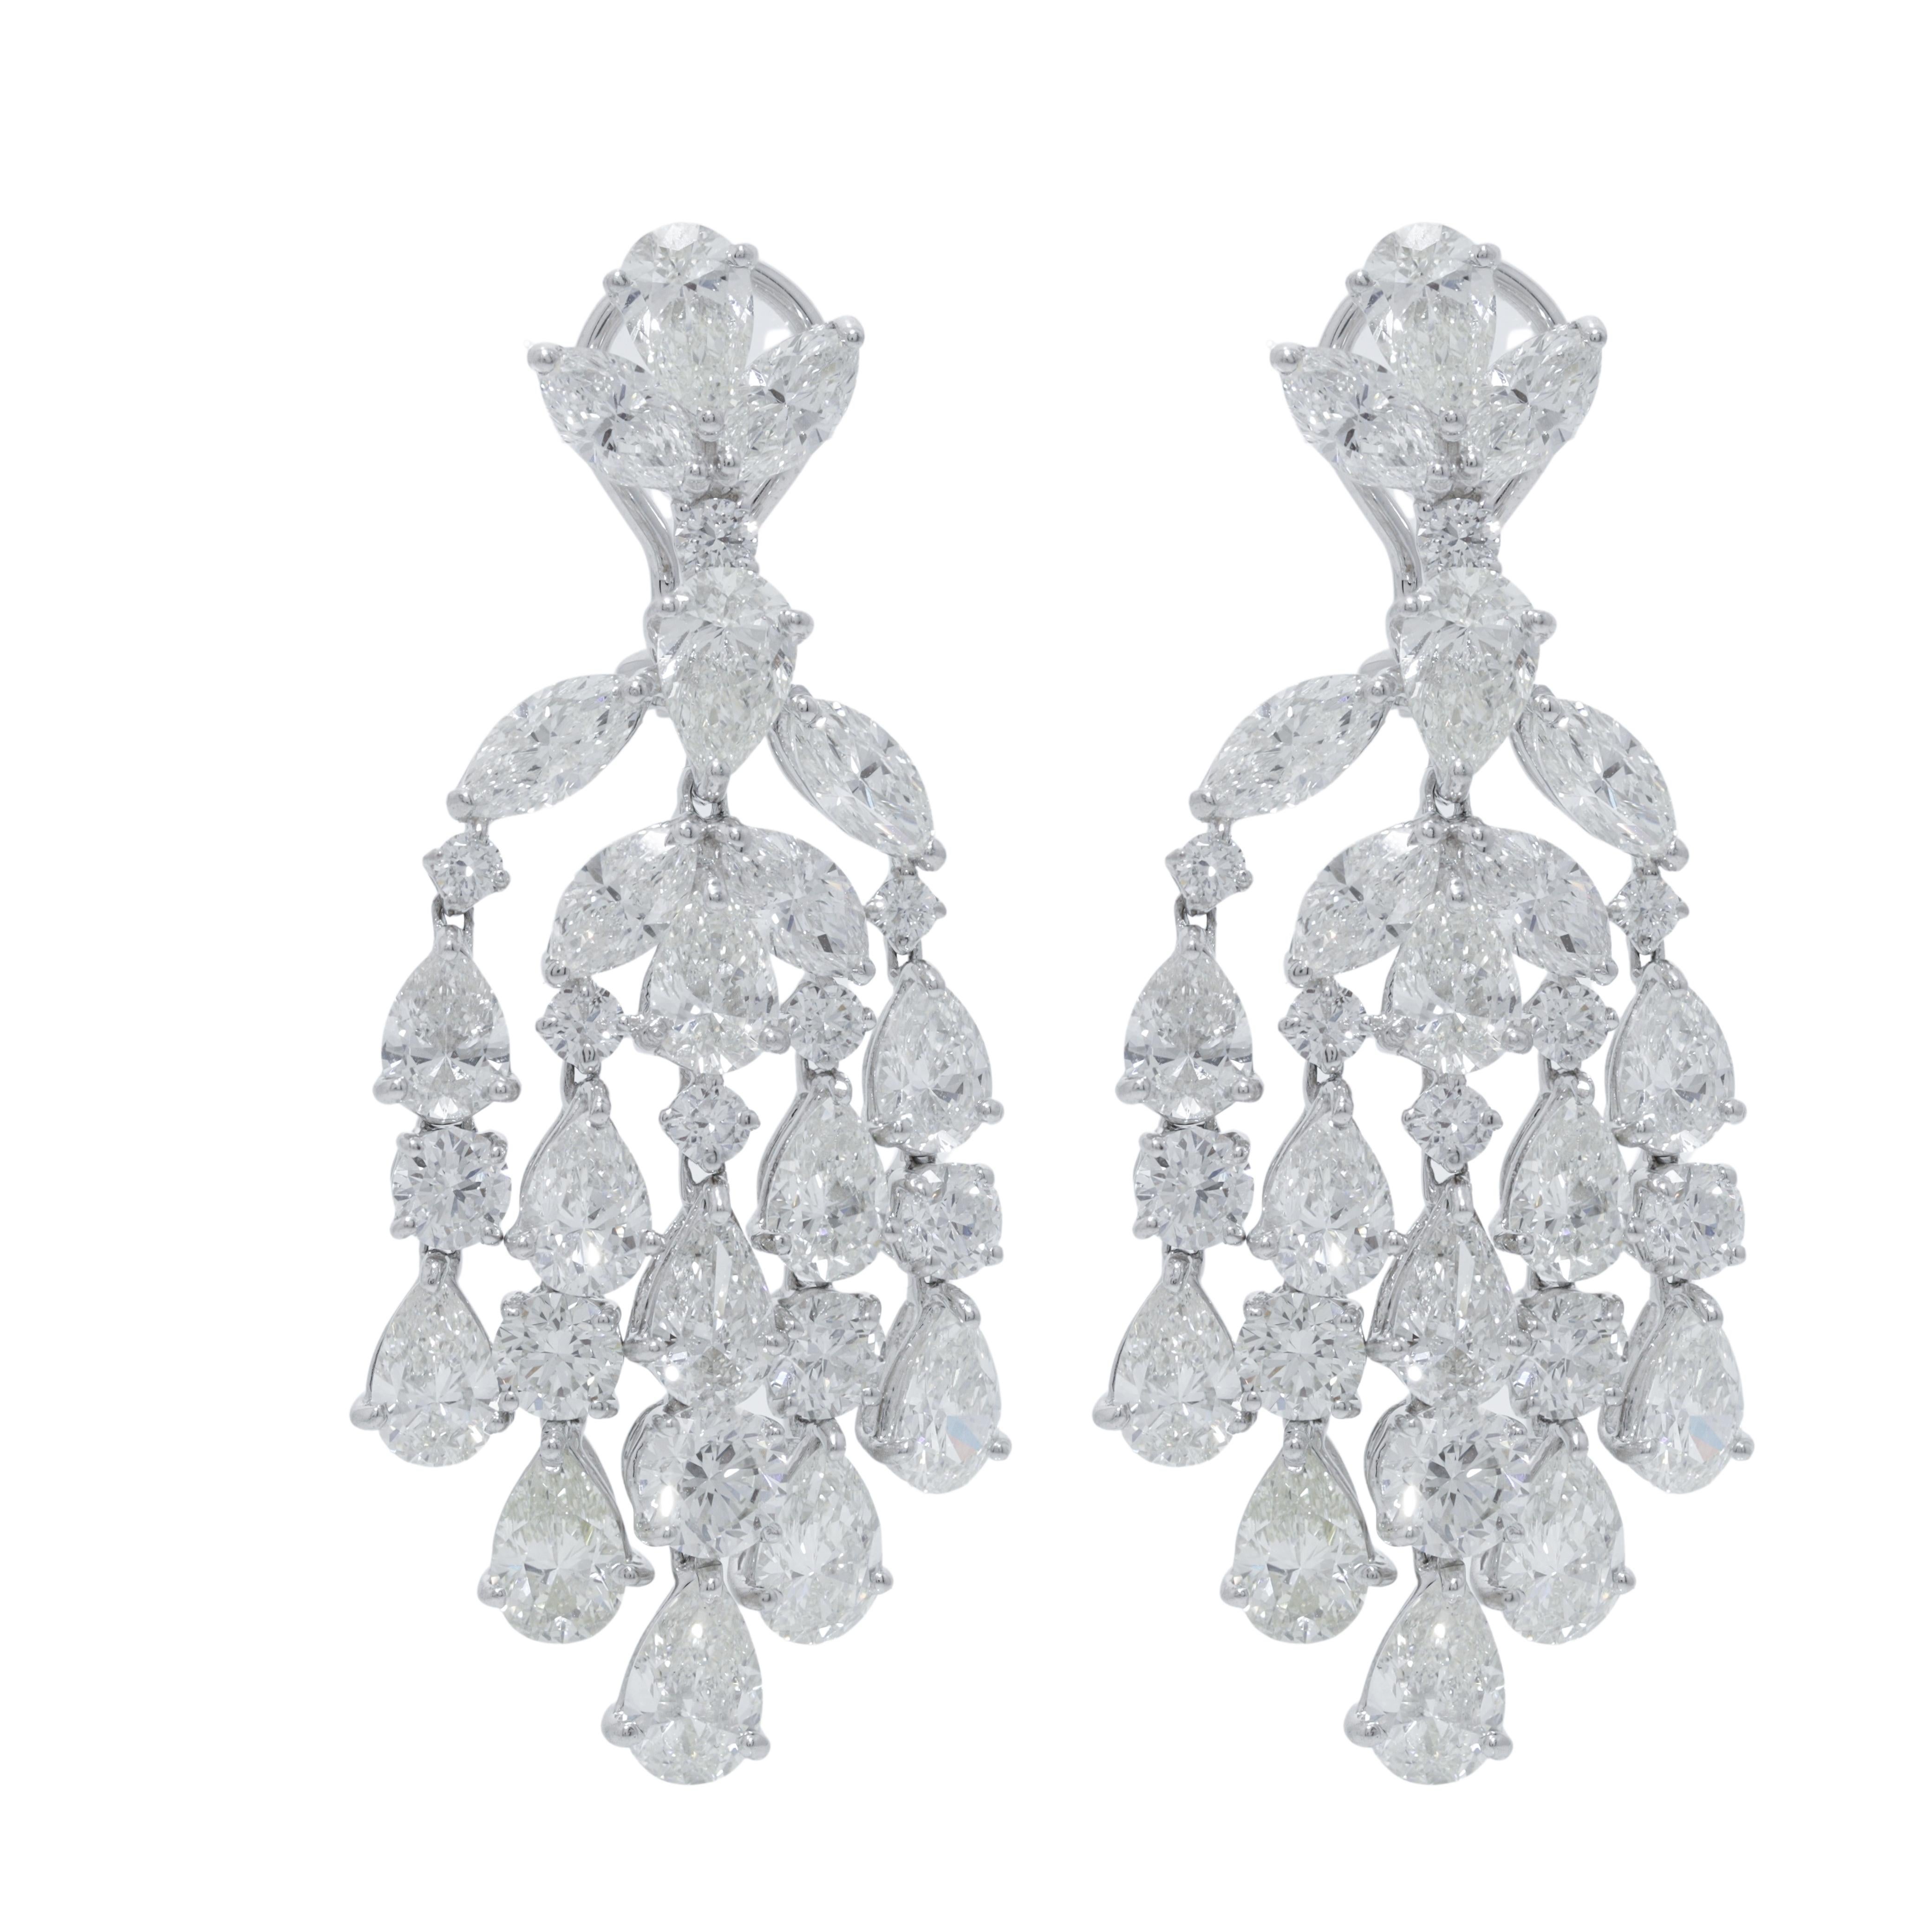 Platinum Chandelier Diamond Earrings, with top diamond cluster and five drops. Features 21.05 Carats of Diamonds. G-H-I in Color VS in Clarity. 
Diana M. is a leading supplier of top-quality fine jewelry for over 35 years.
Diana M is one-stop shop